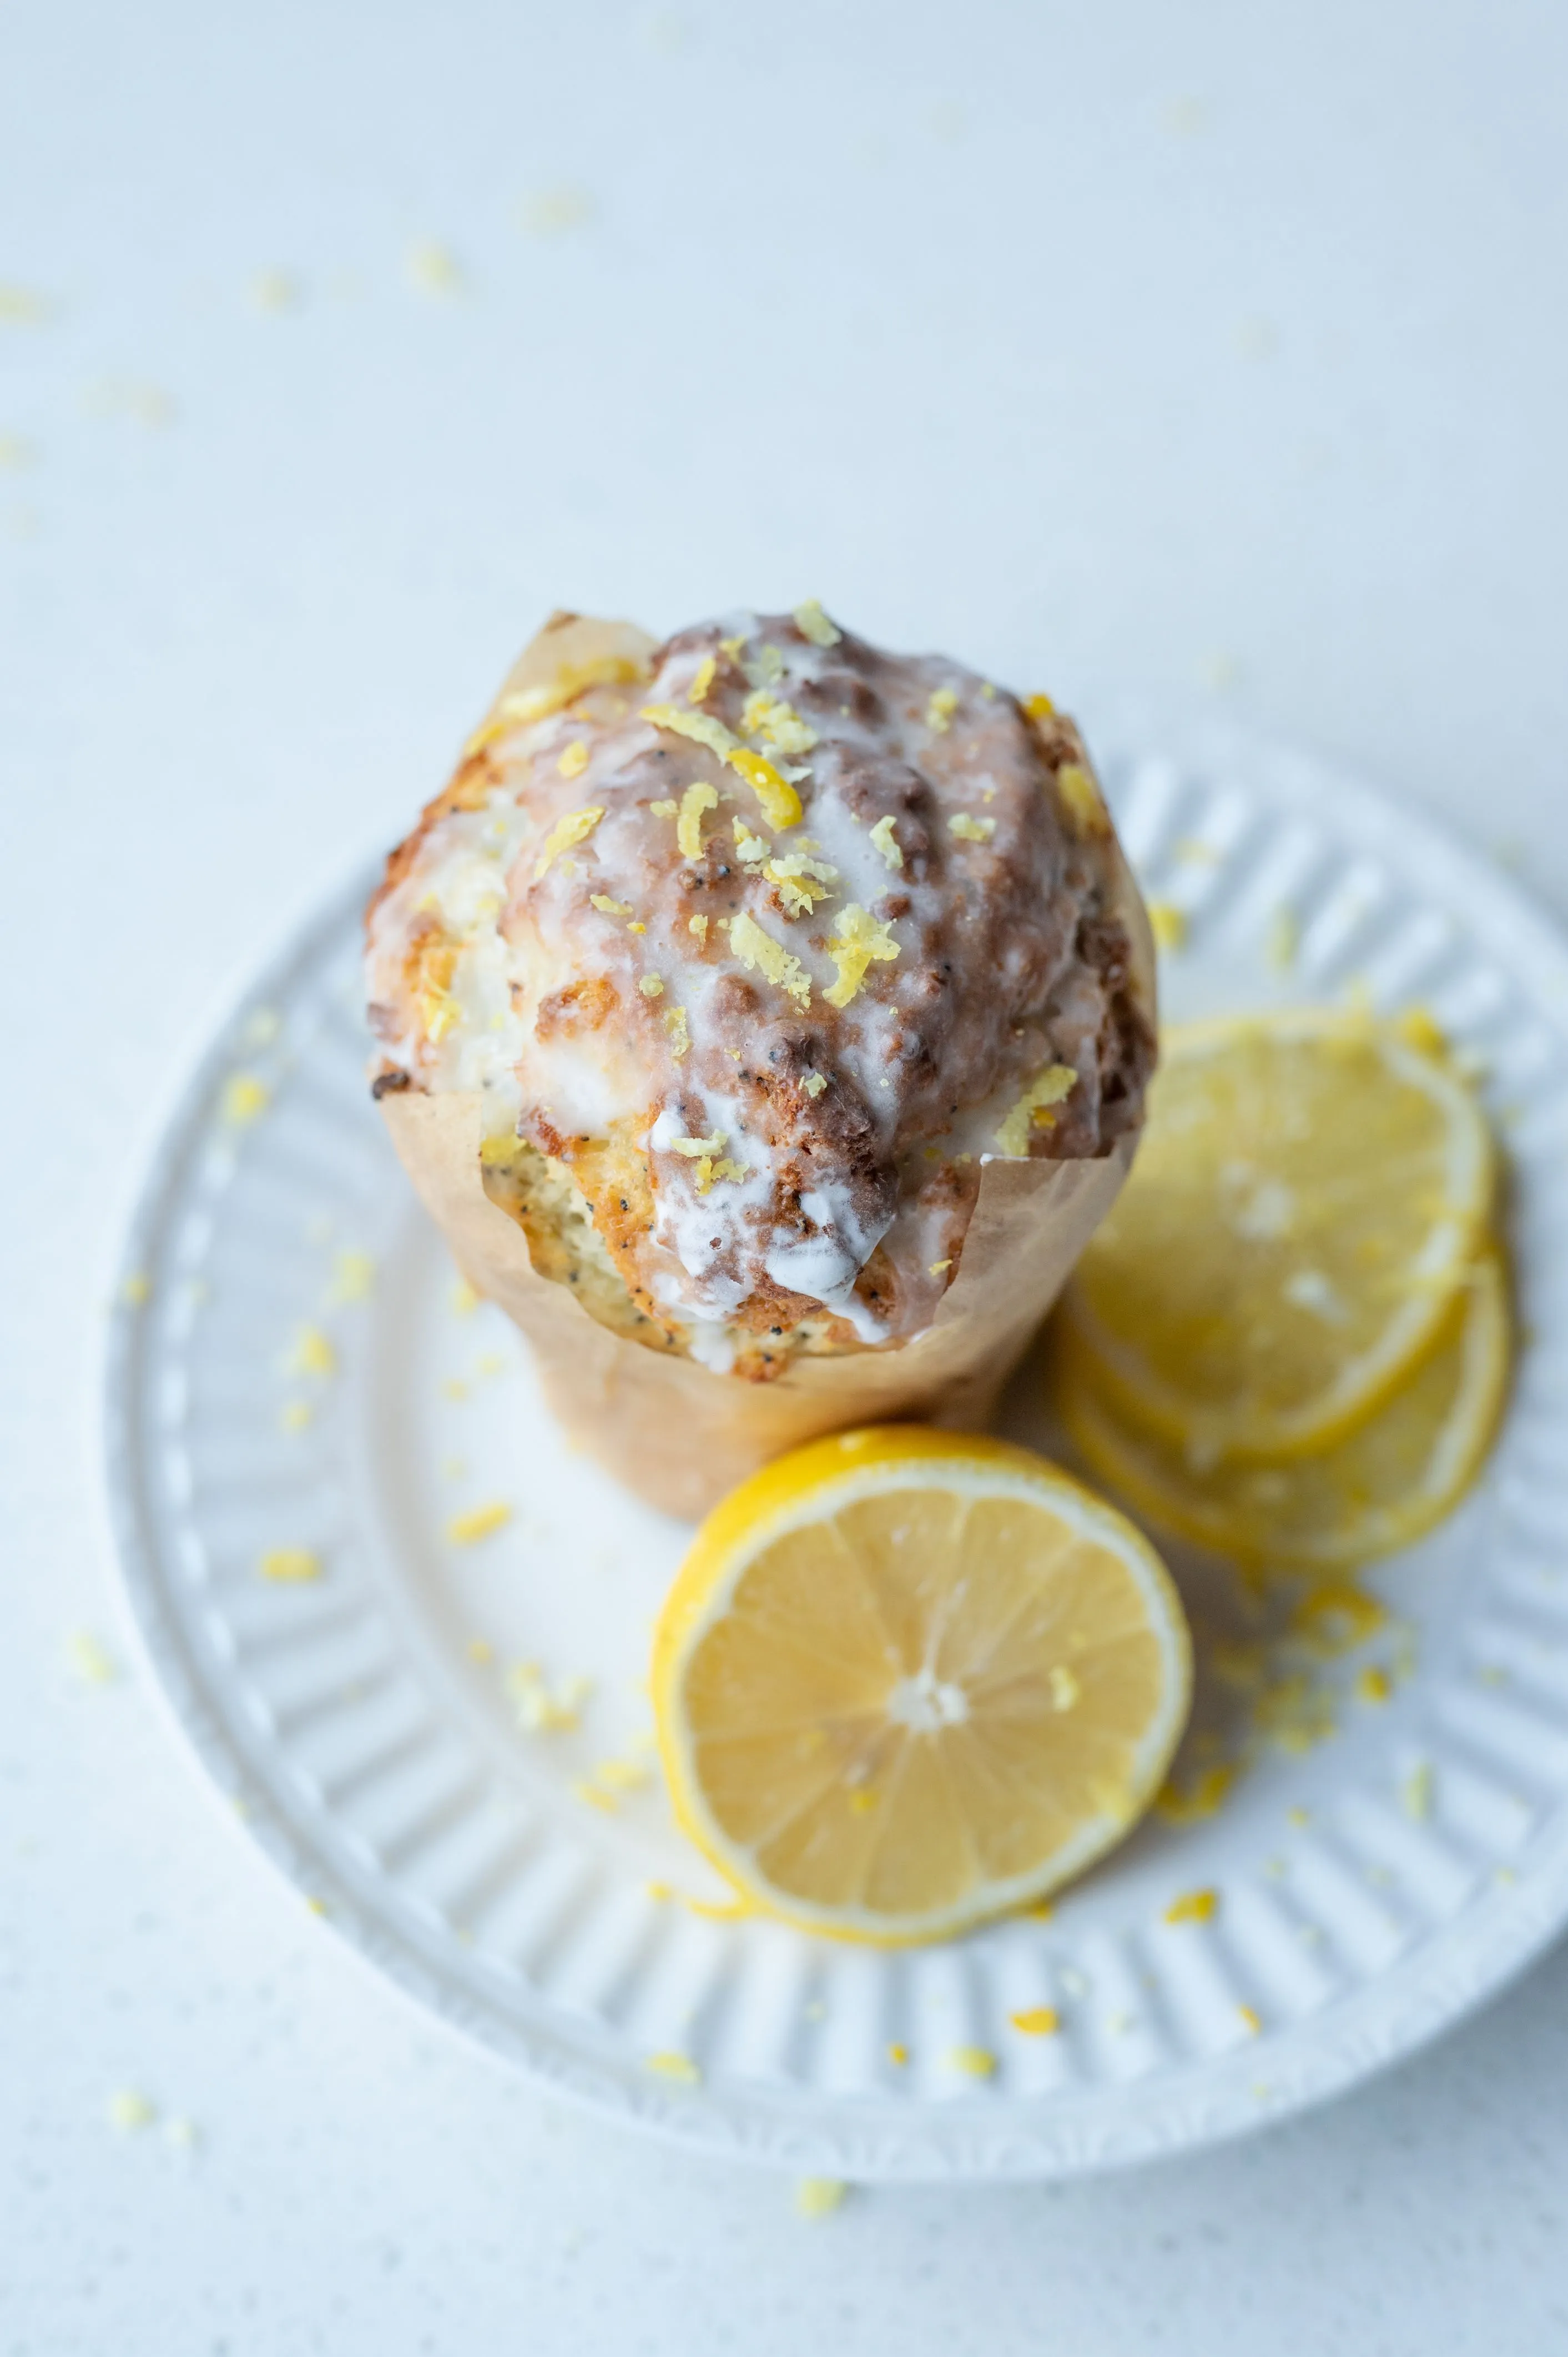 Lemon poppy seed muffin with glaze and lemon zest on a white plate with lemon slices and zest around, on a light surface.